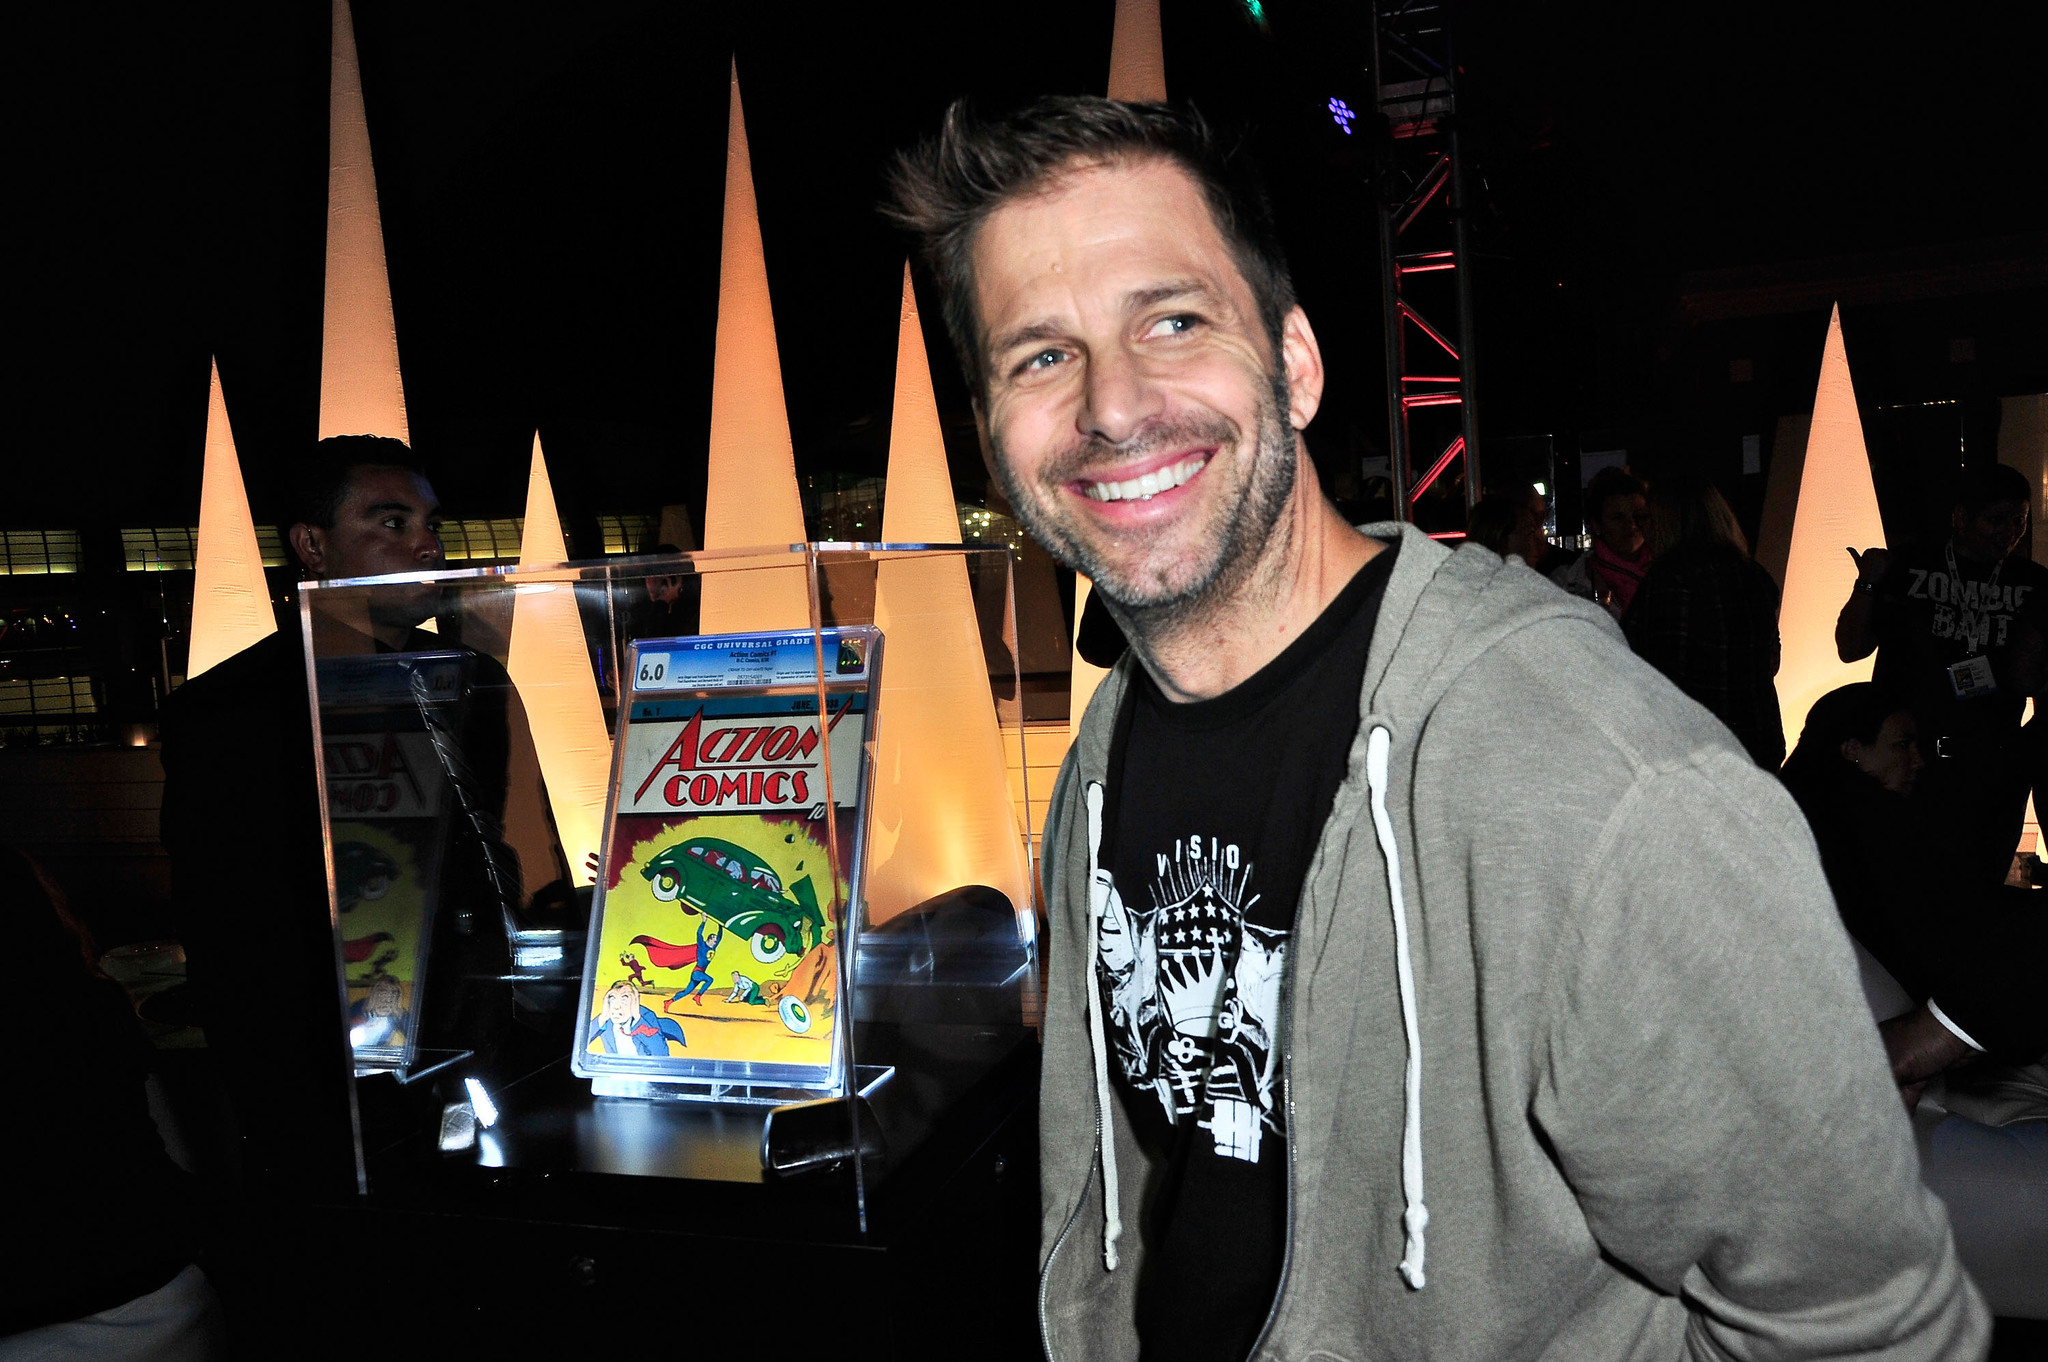 Zack Snyder at event of Zmogus is plieno (2013)